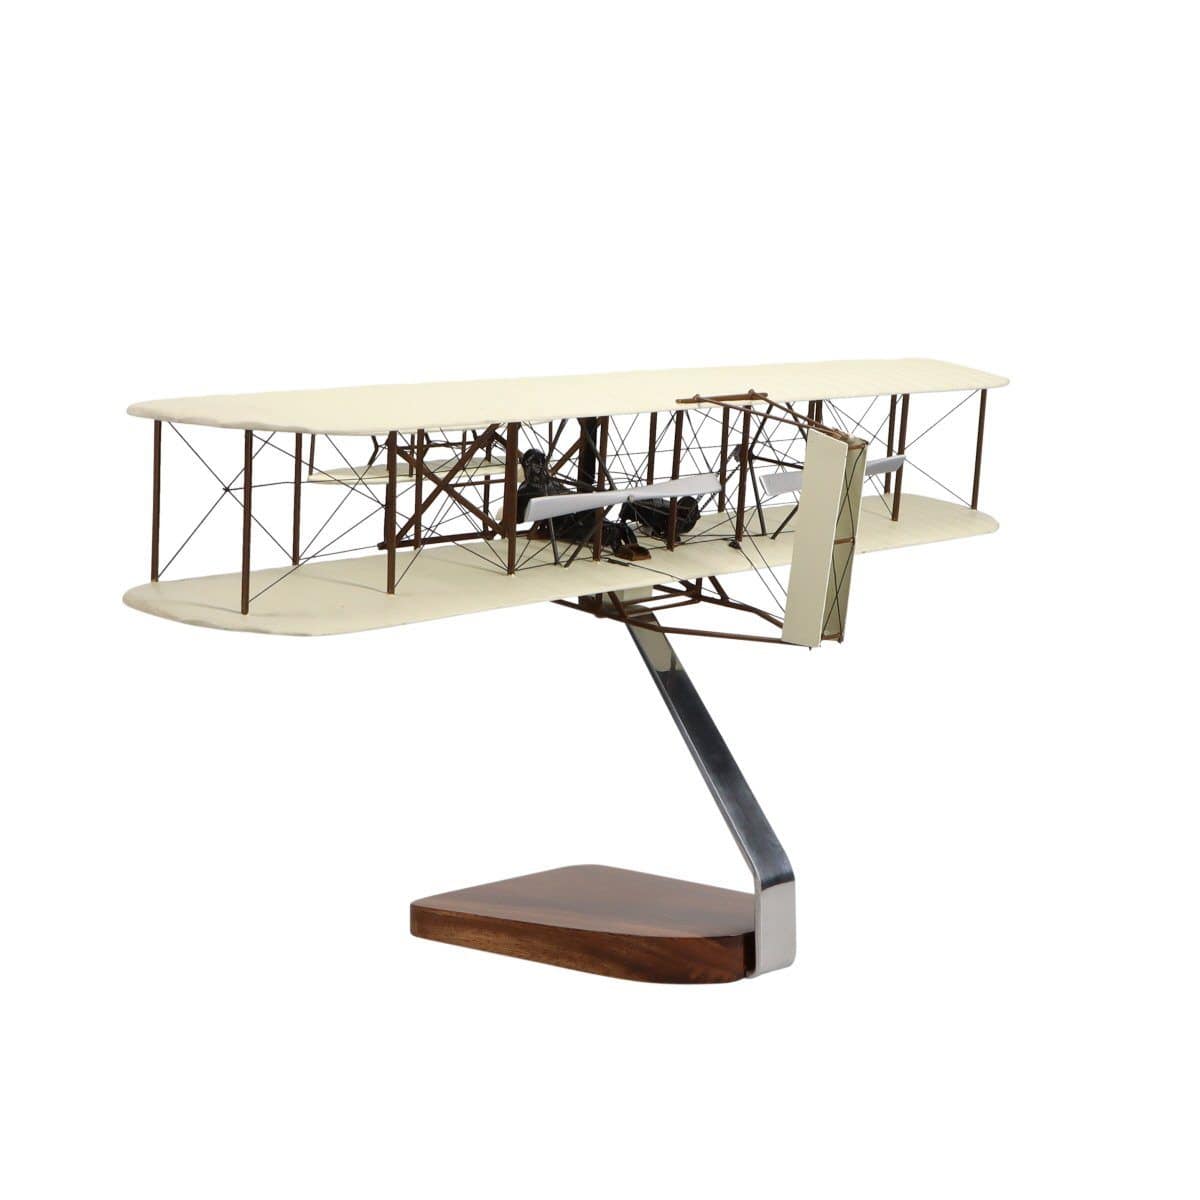 Wright Flyer "Orville and Wilbur Wright" (High Detail) Large Mahogany Model - PilotMall.com